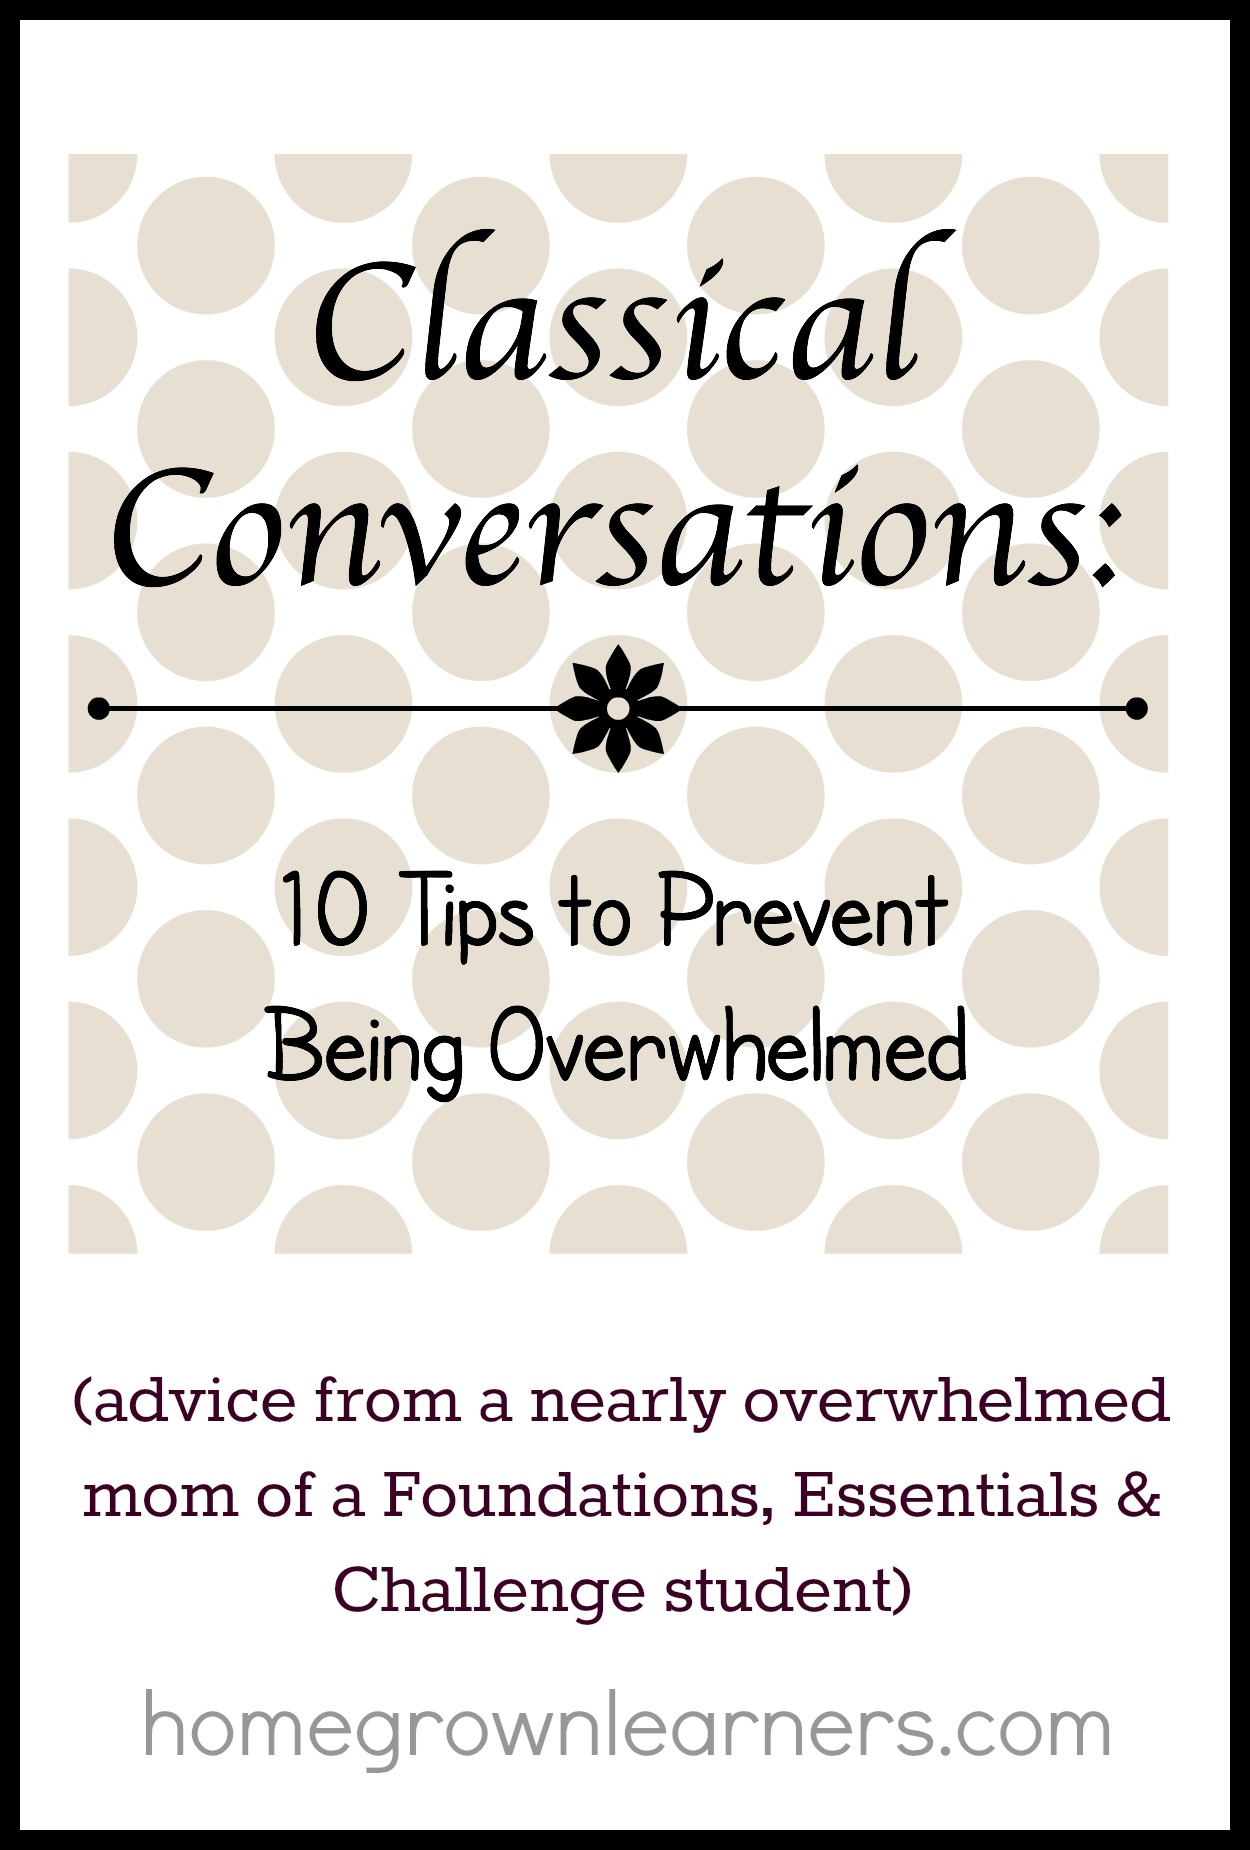 Classical Conversations: 10 Tips to Prevent Being Overwhelemed